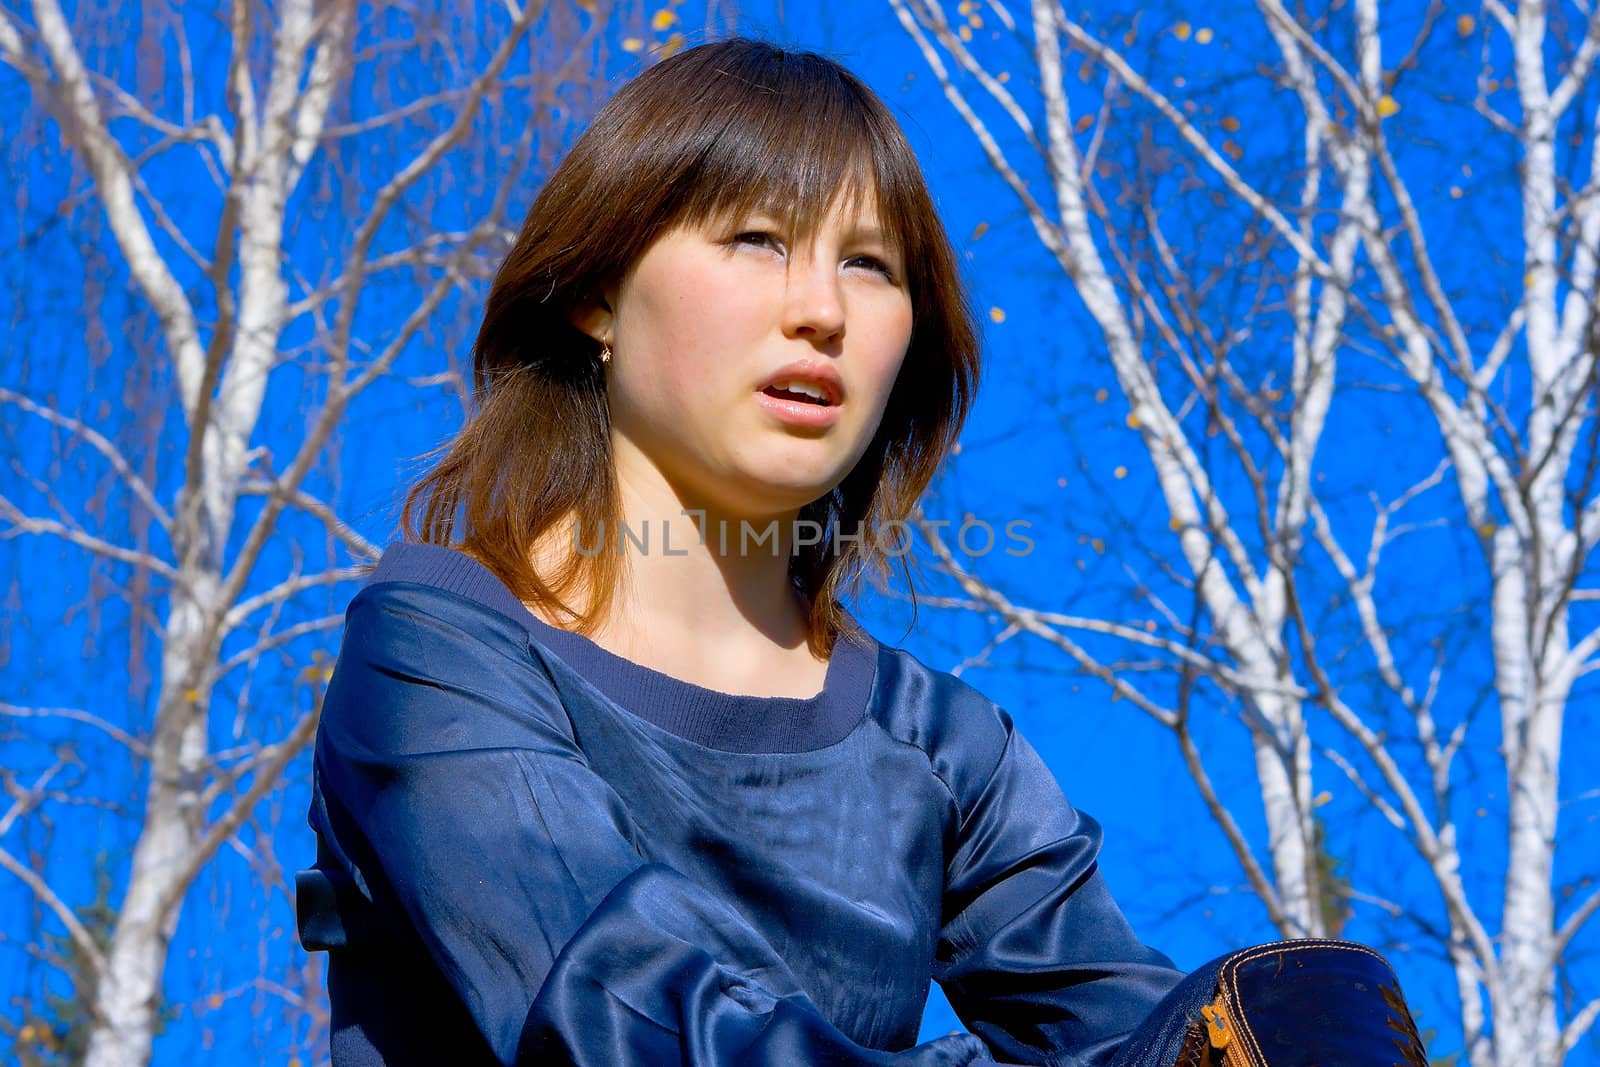 Portrait of the asian young girl against blue sky and birches